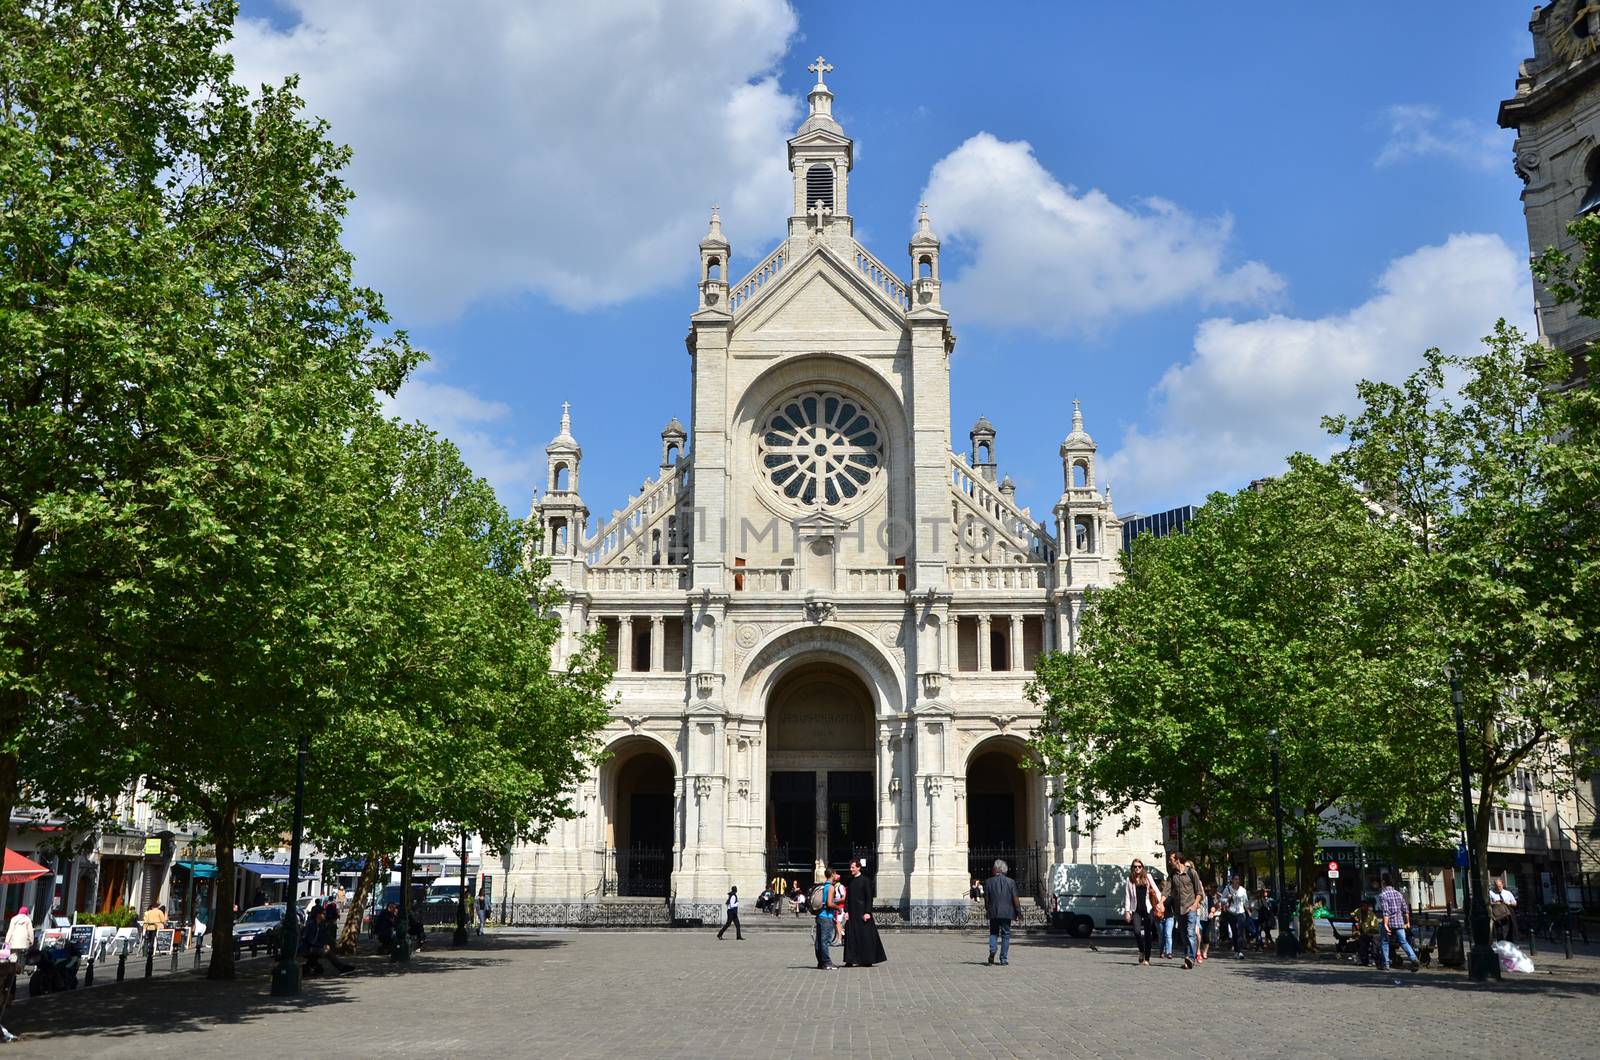 Brussels, Belgium - May 12, 2015: Peoples visit saint catherine church by siraanamwong